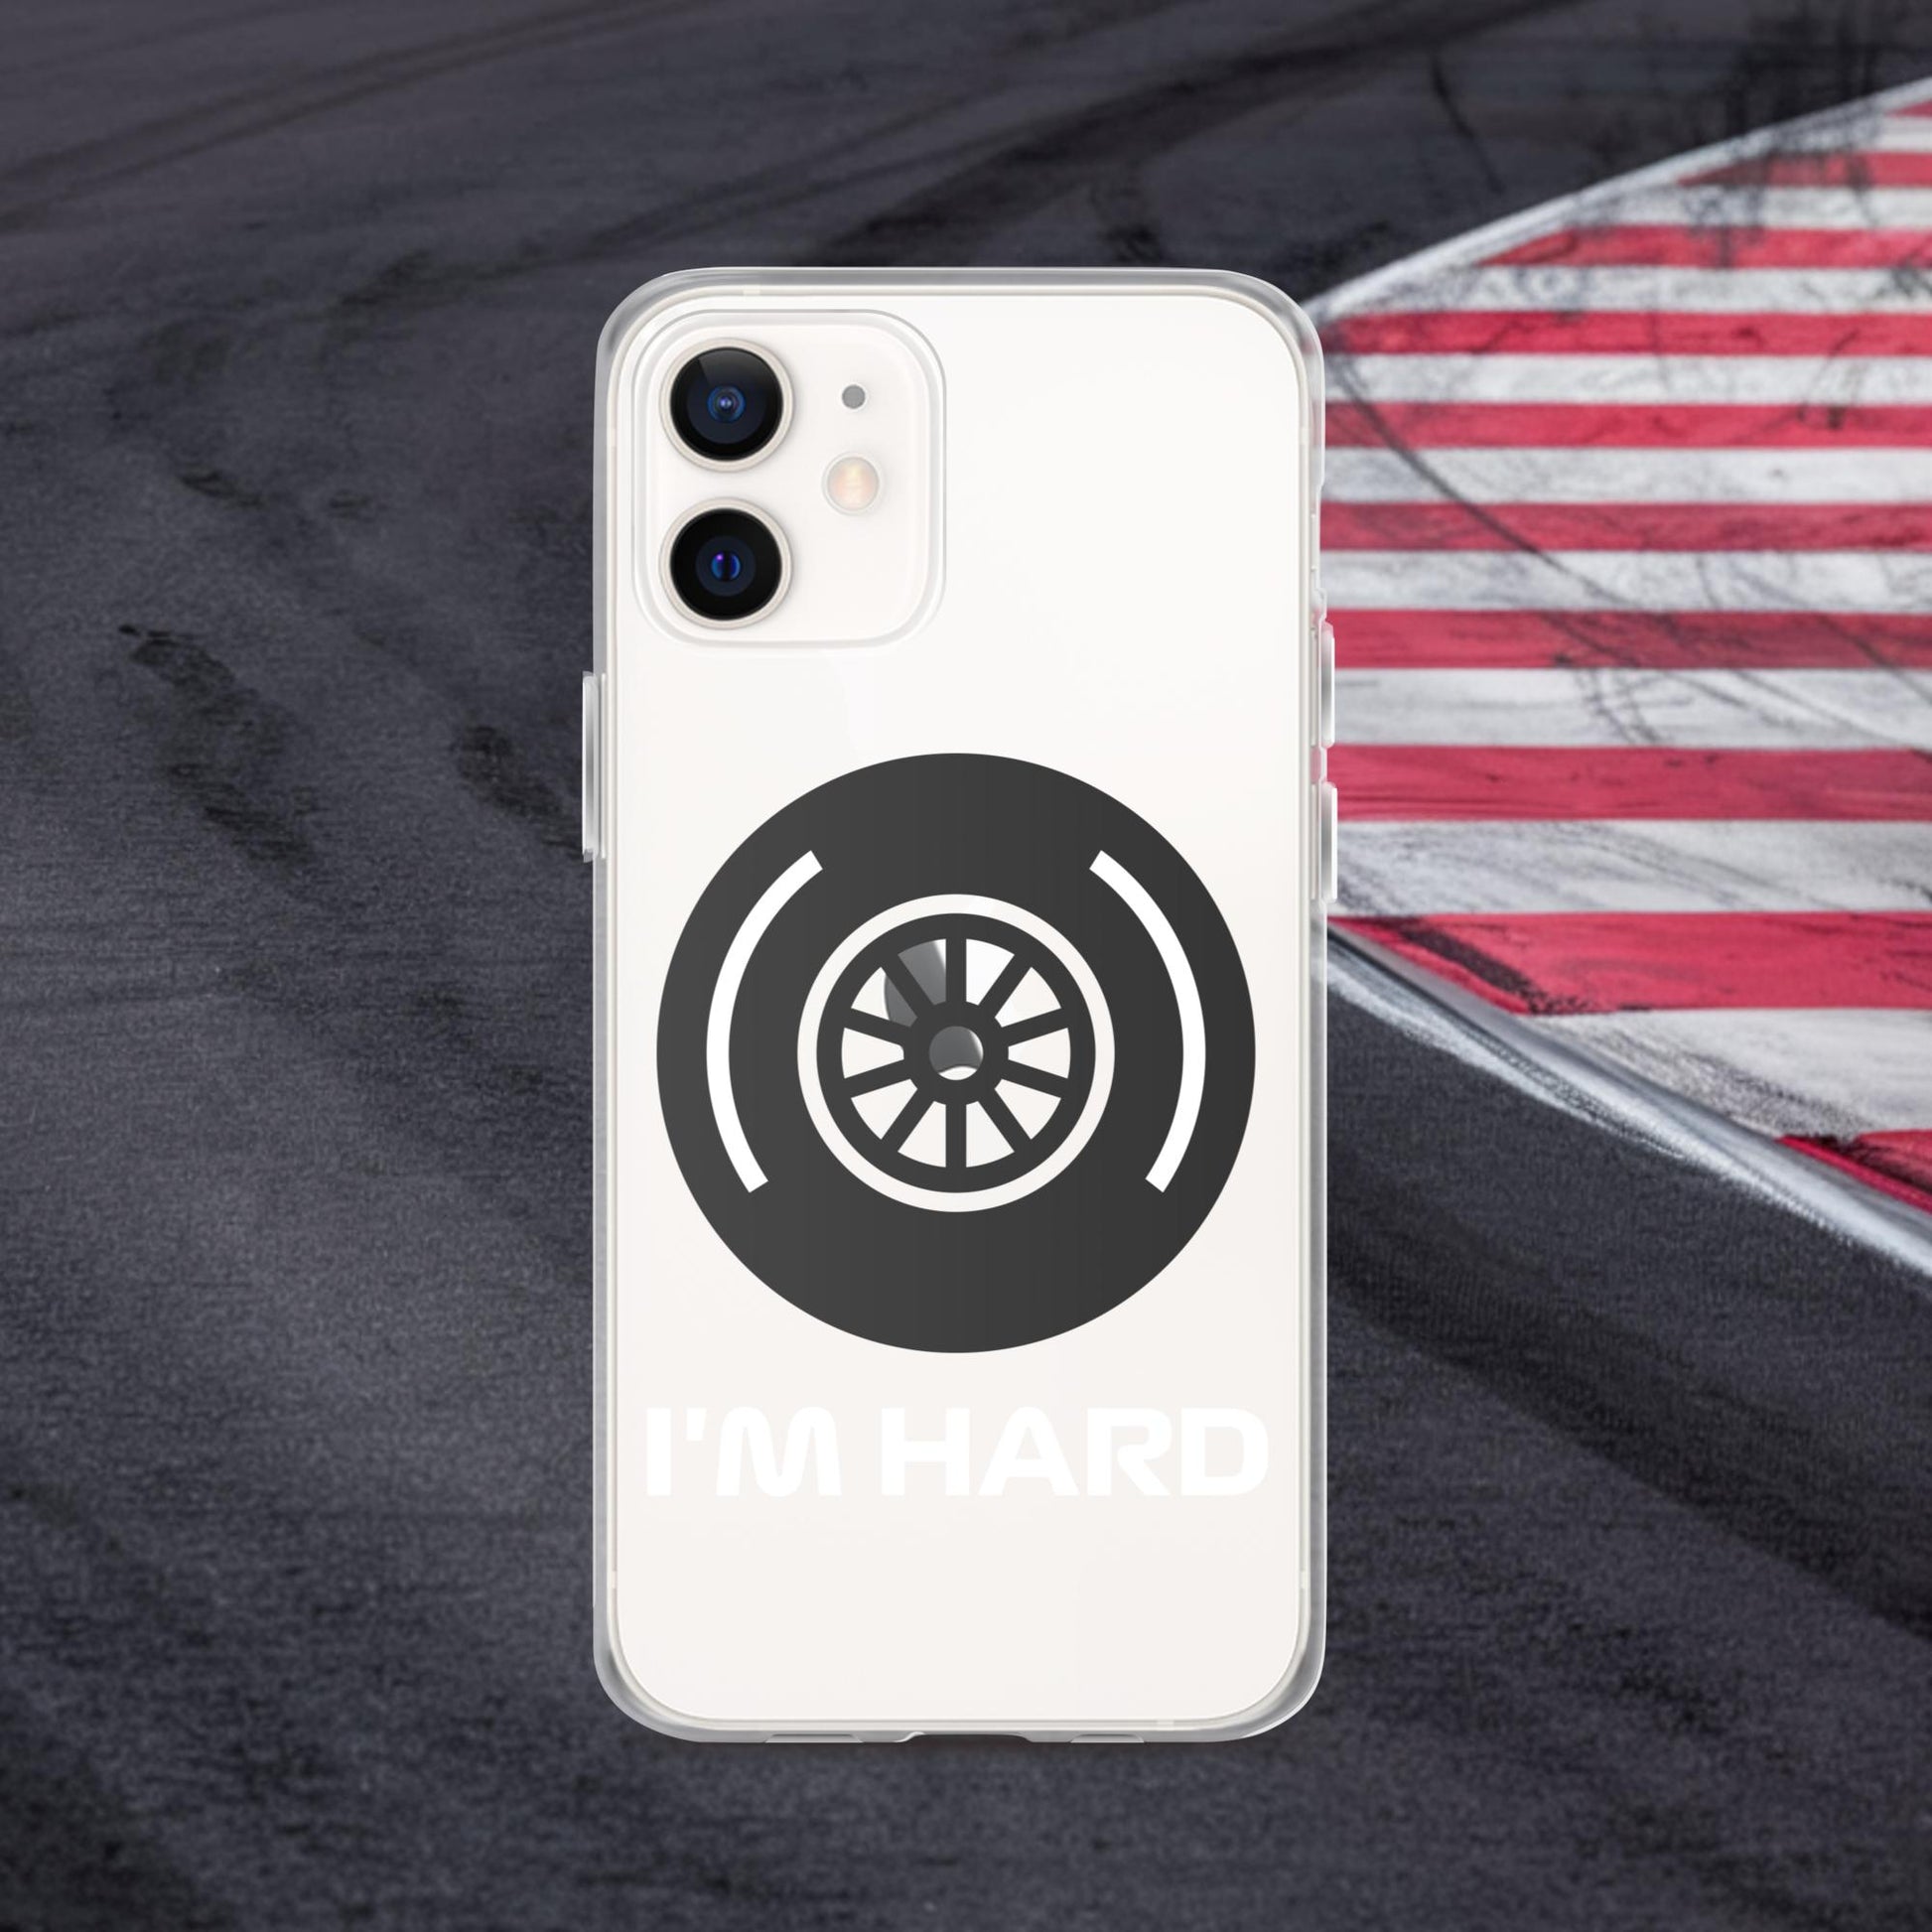 I'm Hard Tyres Funny F1 Clear Case for iPhone Next Cult Brand